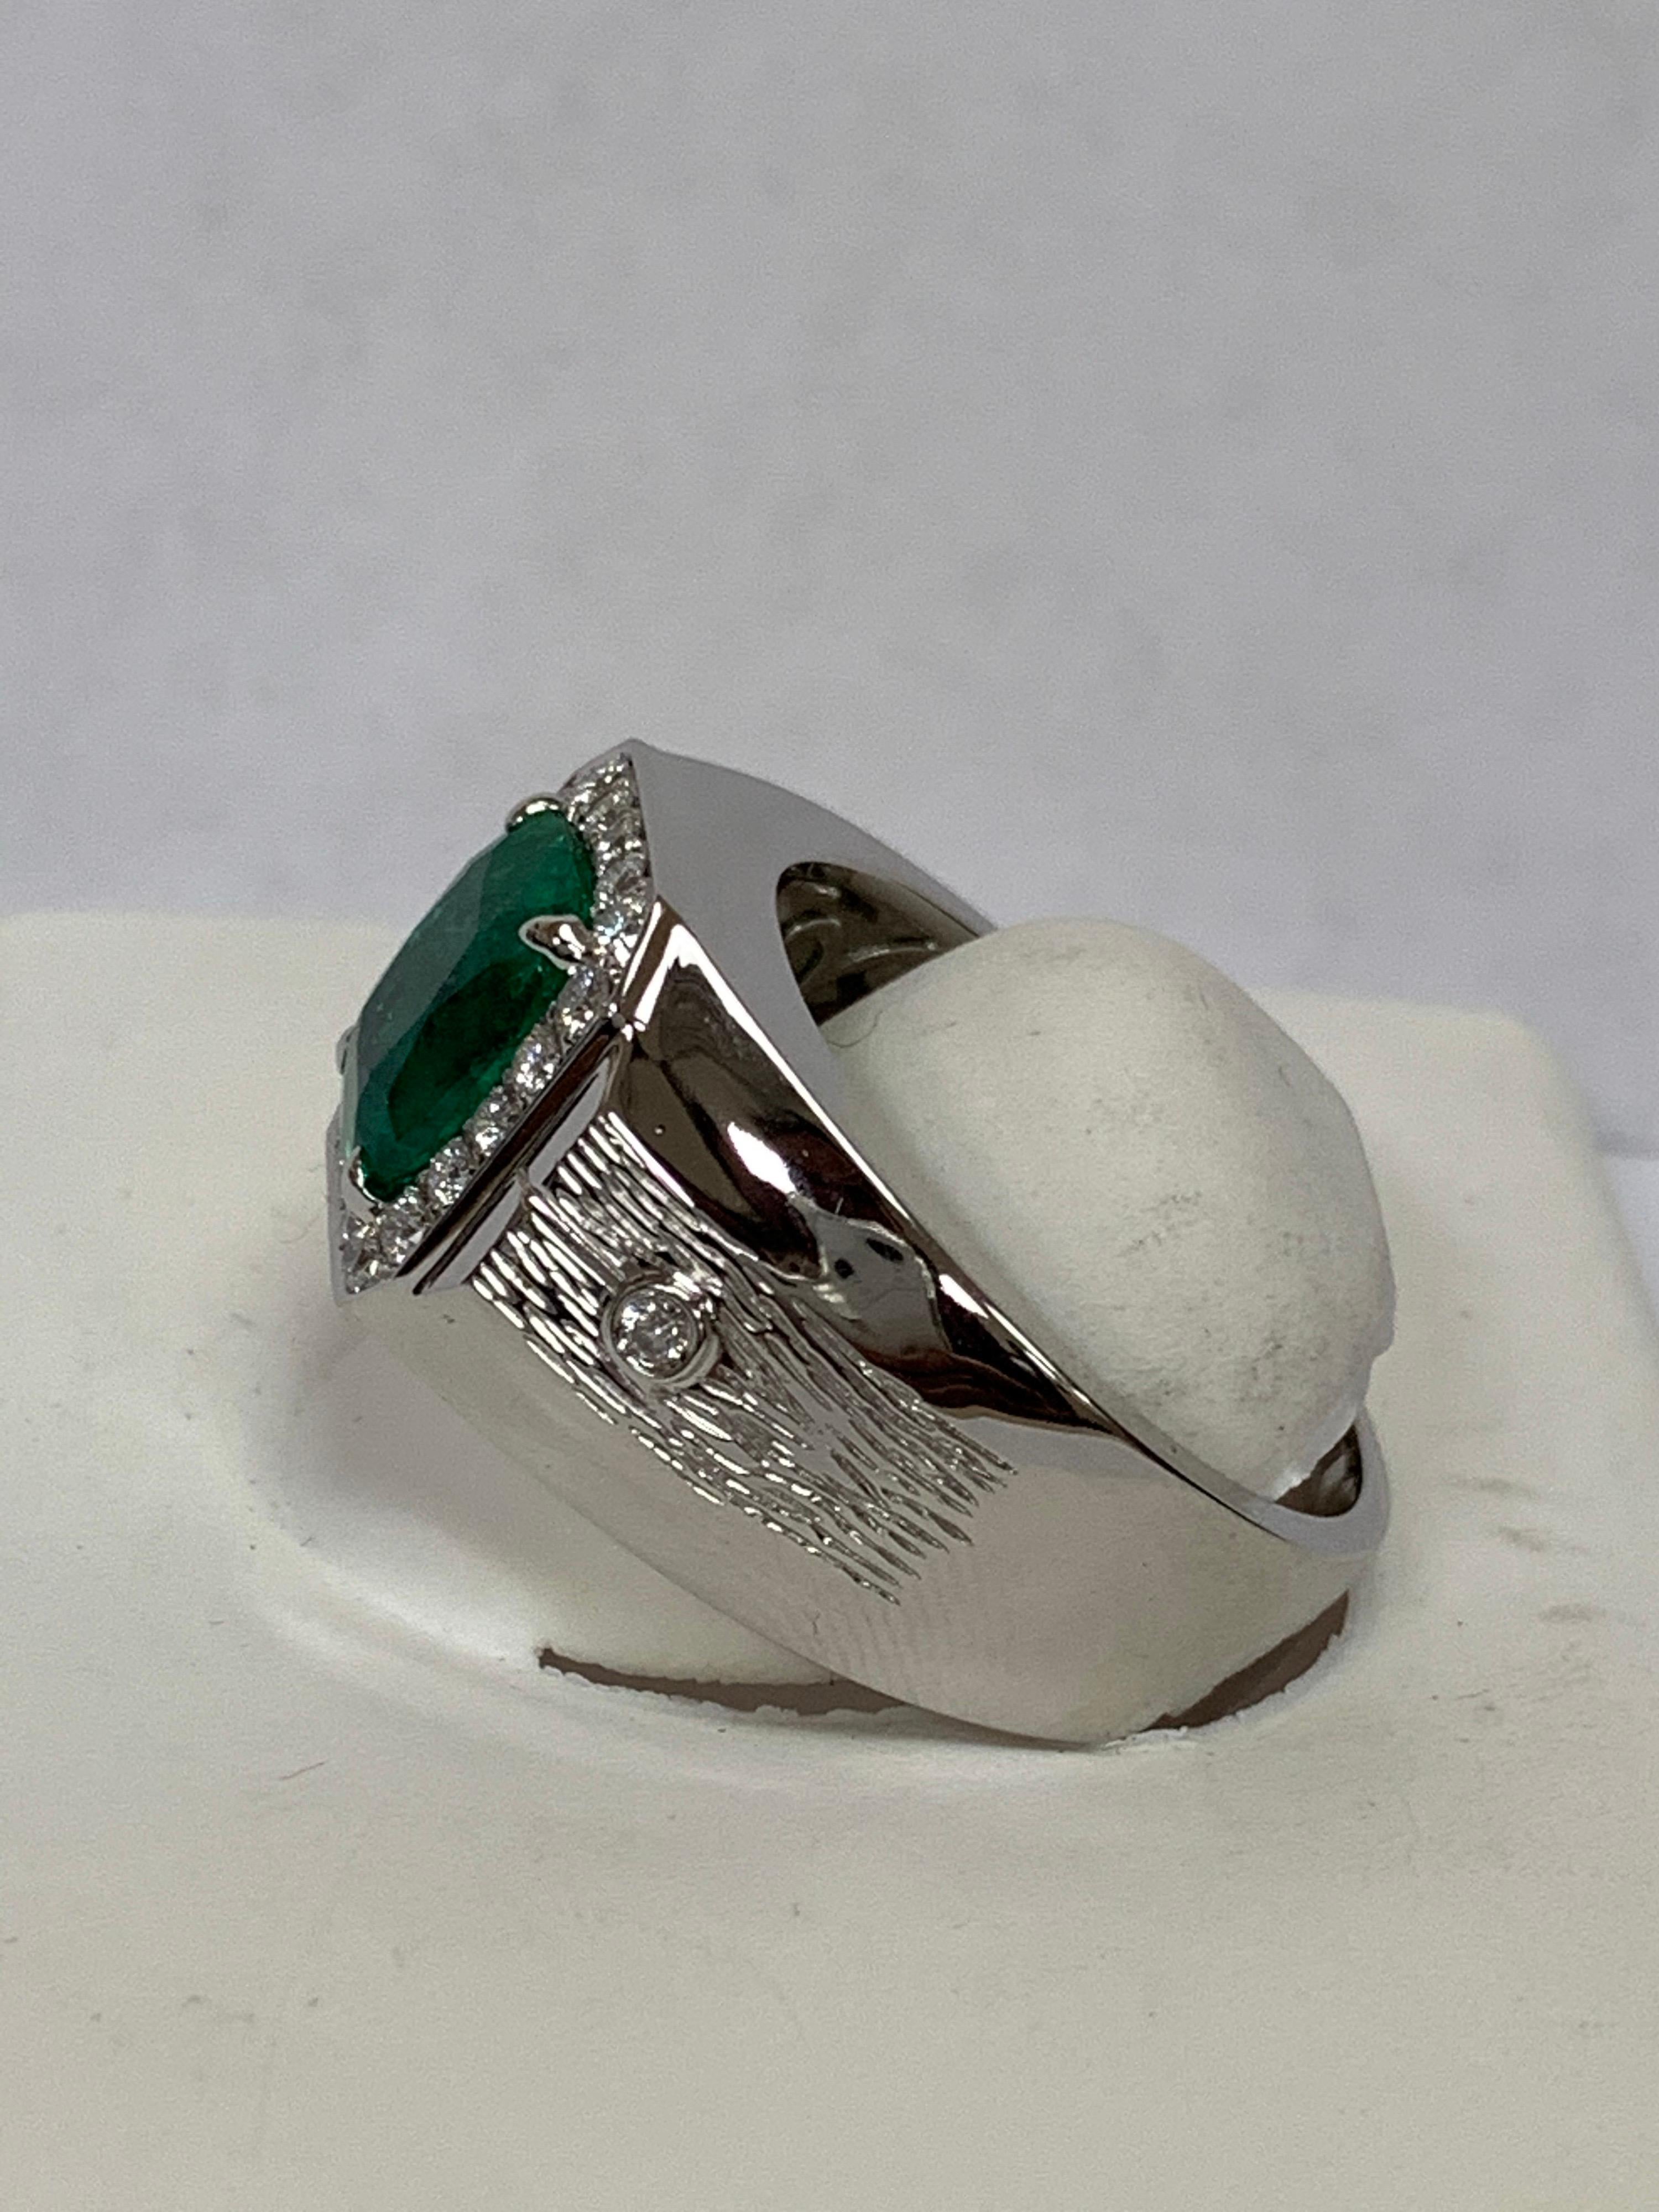 Natural 3.00 Carat emerald with 0.42 Carat diamonds accents set in 14 Karat white gold, solid mounting is one of a kind hand crafted ring . The Ring  size is 12  and can be resized if needed.
